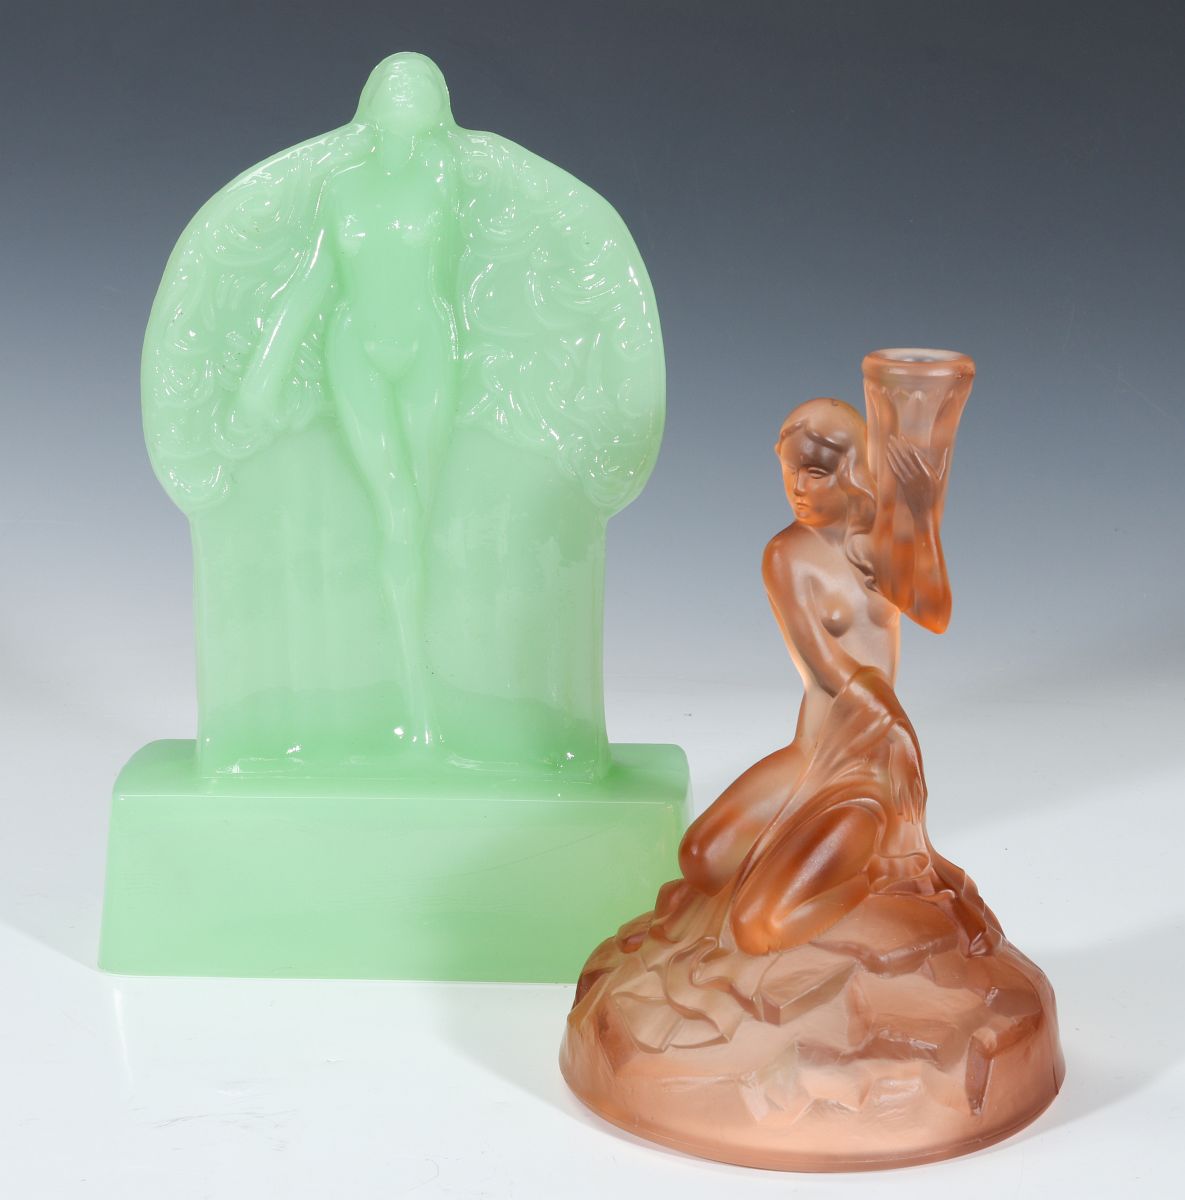 TWO ART DECO ART GLASS LAMP BASES WITH NUDES